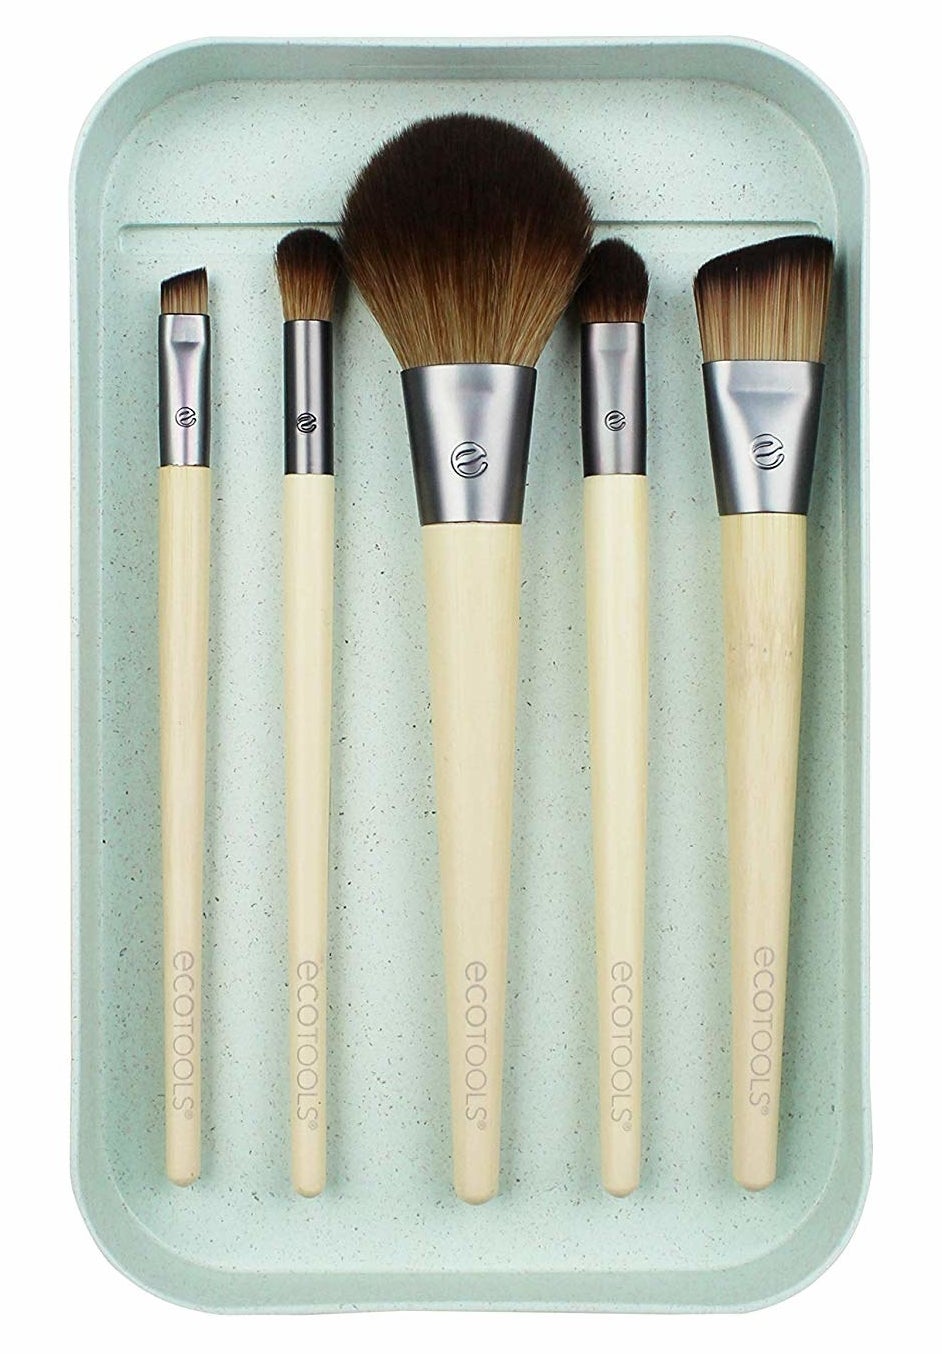 the five makeup brushes